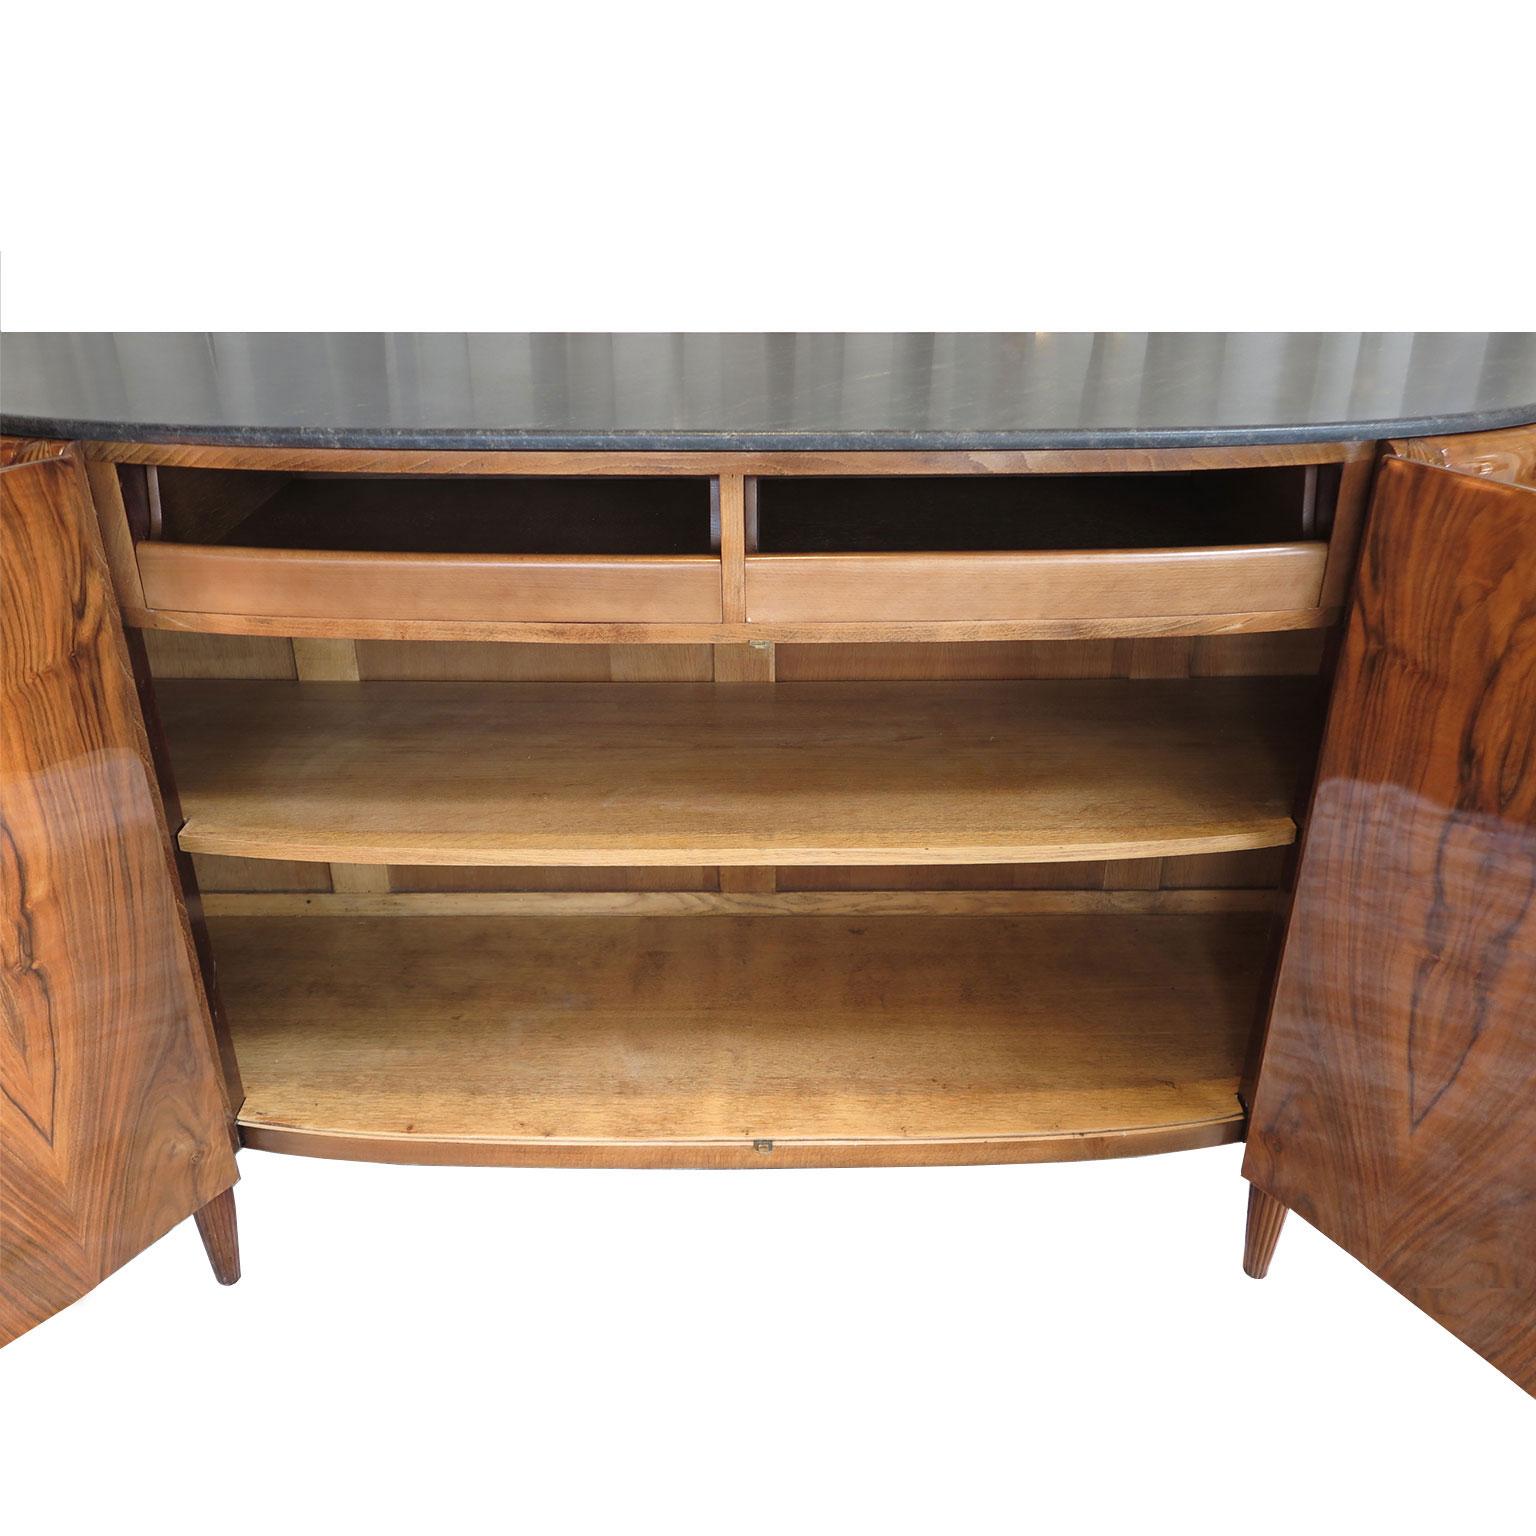 Early 20th Century French Art Deco Sideboard by Michel Dufet in Walnut with Floral Marquetry